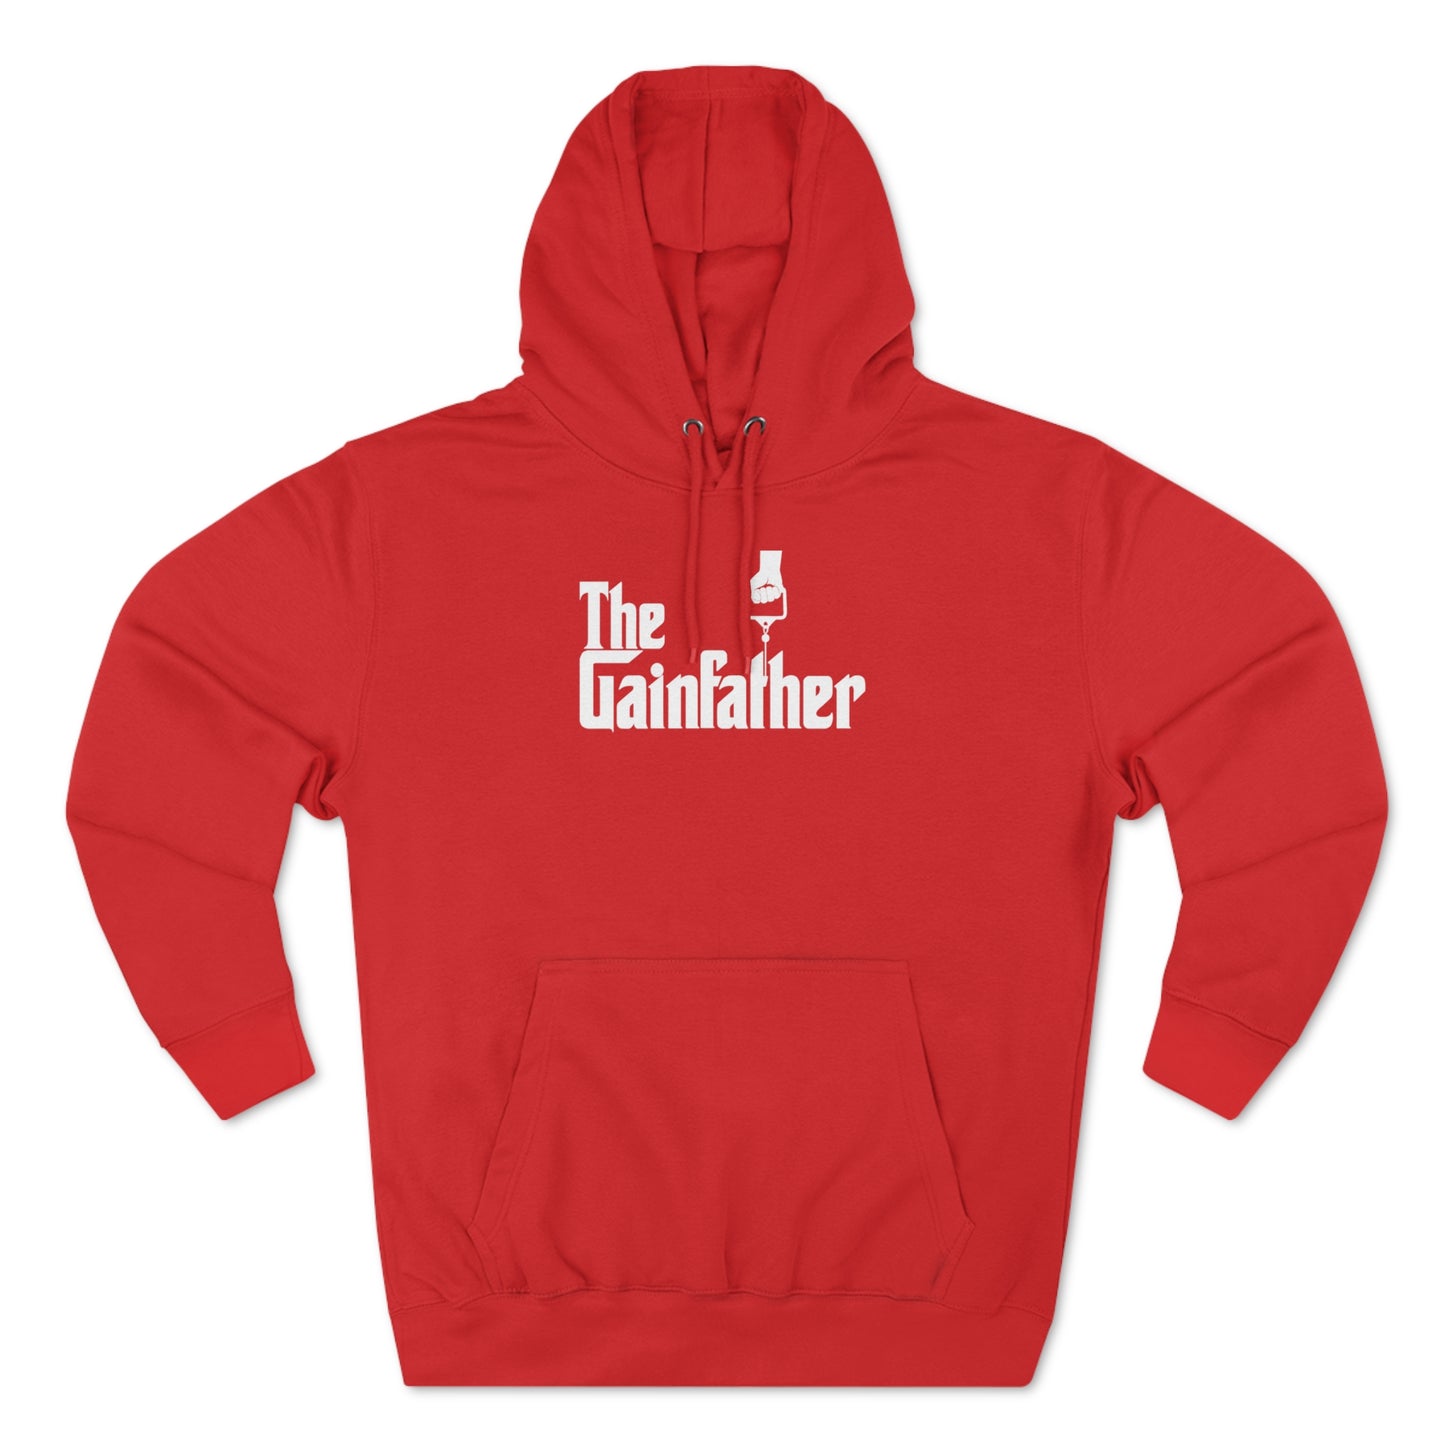 The Gainfather Hoodie